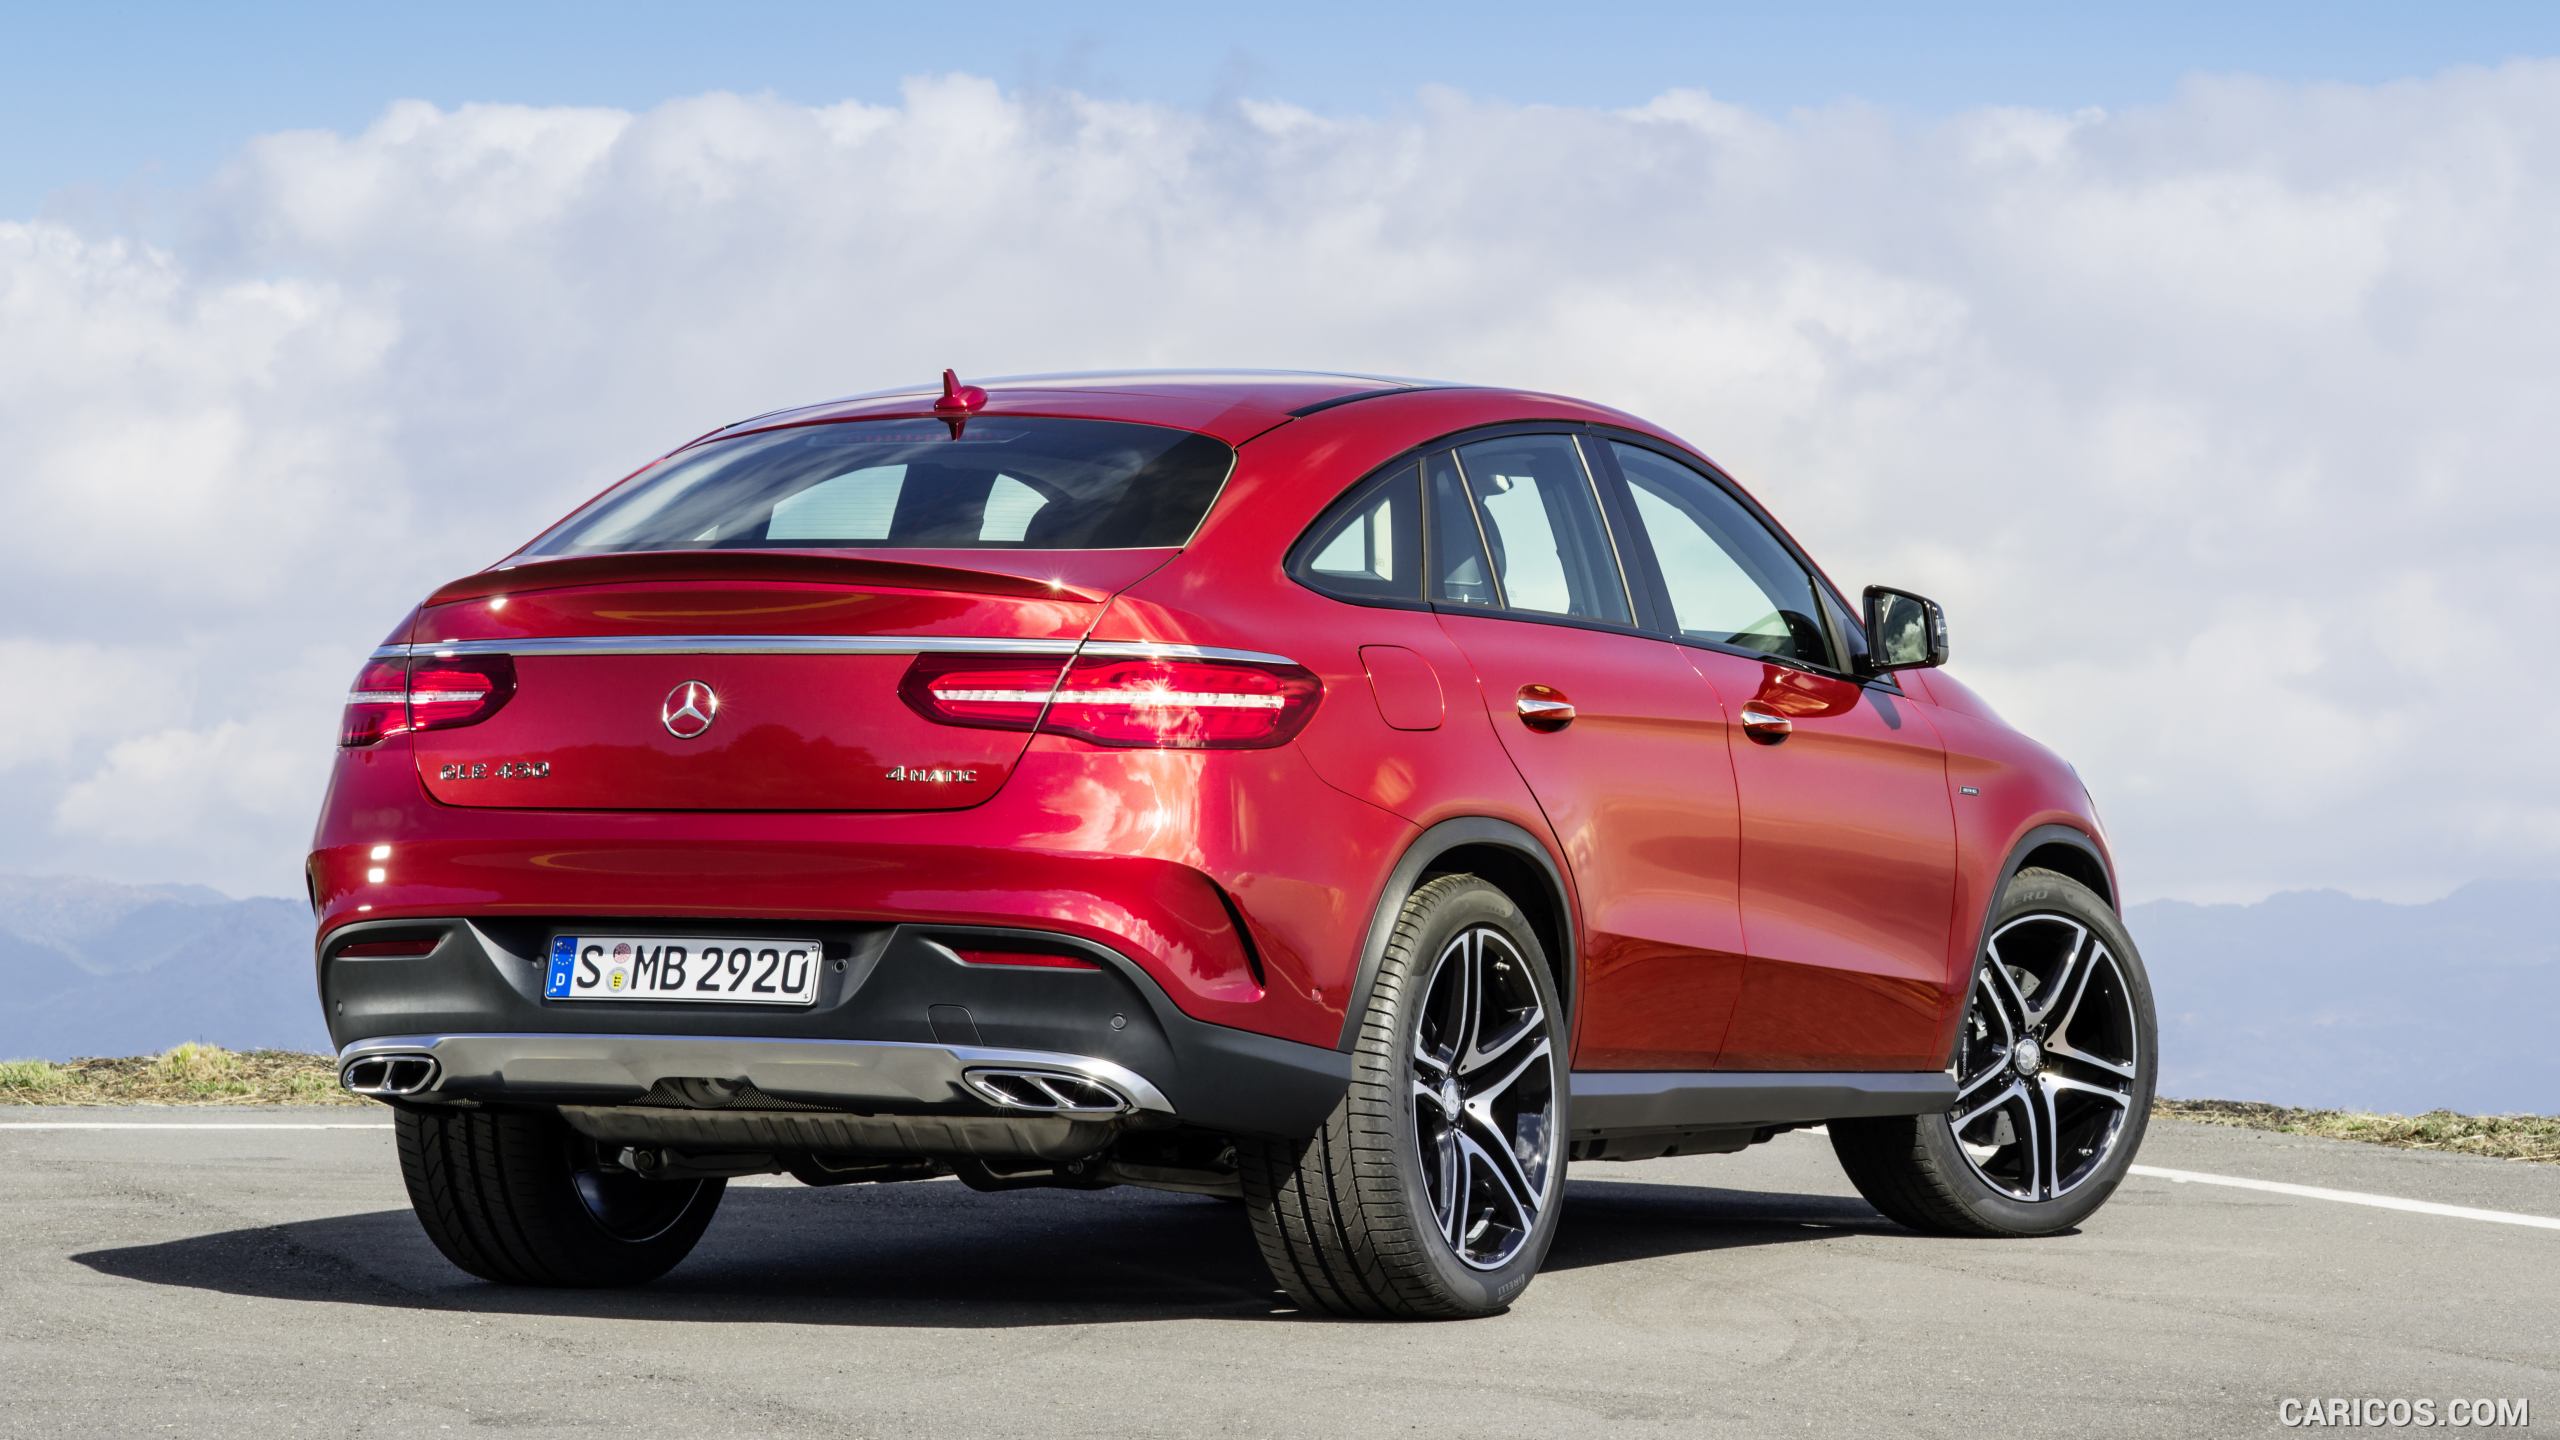 2016 Mercedes-Benz GLE 450 AMG Coupe 4MATIC (Designo Hyacinth Red Metallic) - Rear, #33 of 115